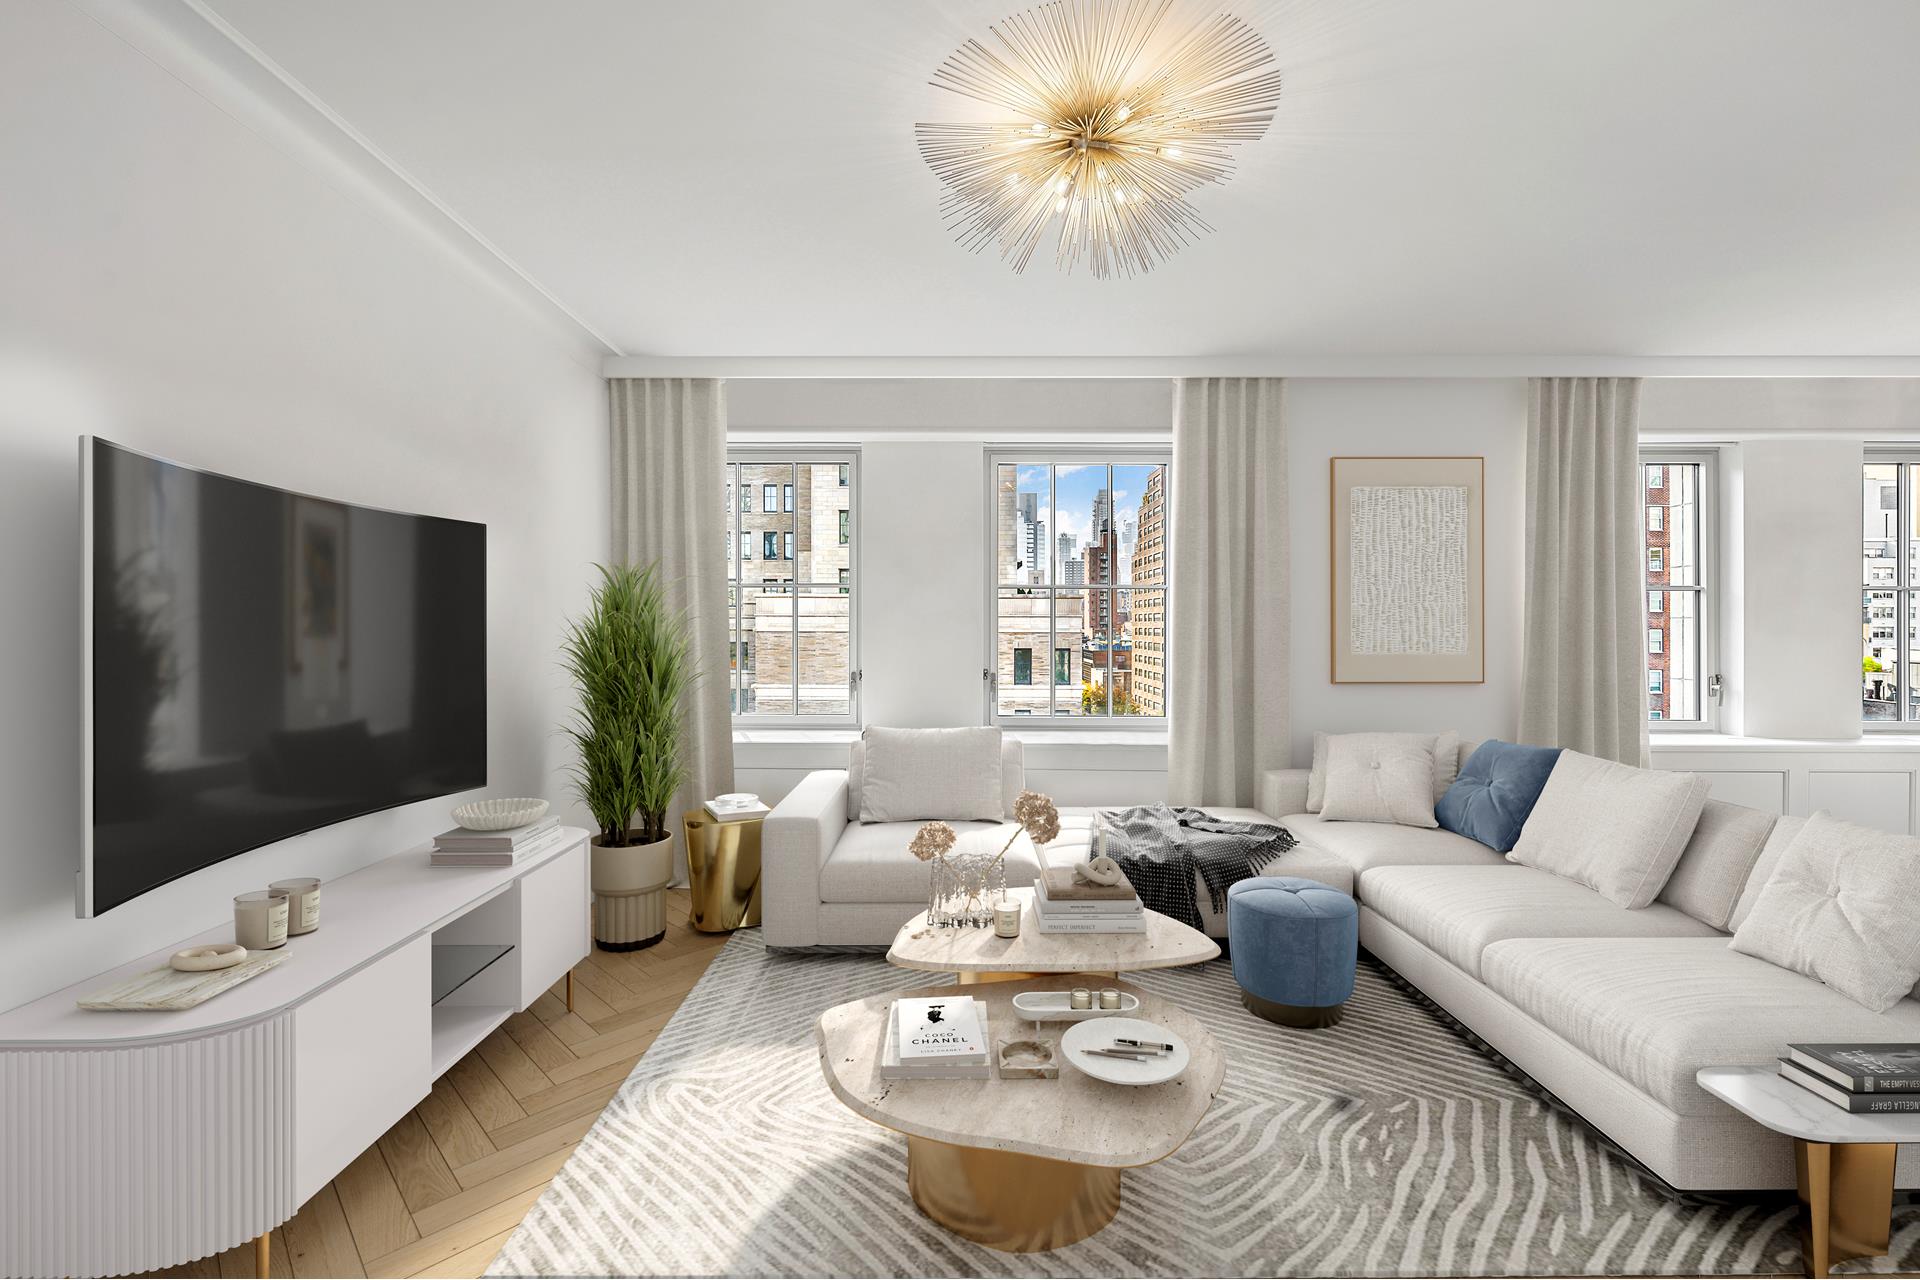 301 East 81st Street 8A, Yorkville, Upper East Side, NYC - 3 Bedrooms  
3.5 Bathrooms  
8 Rooms - 